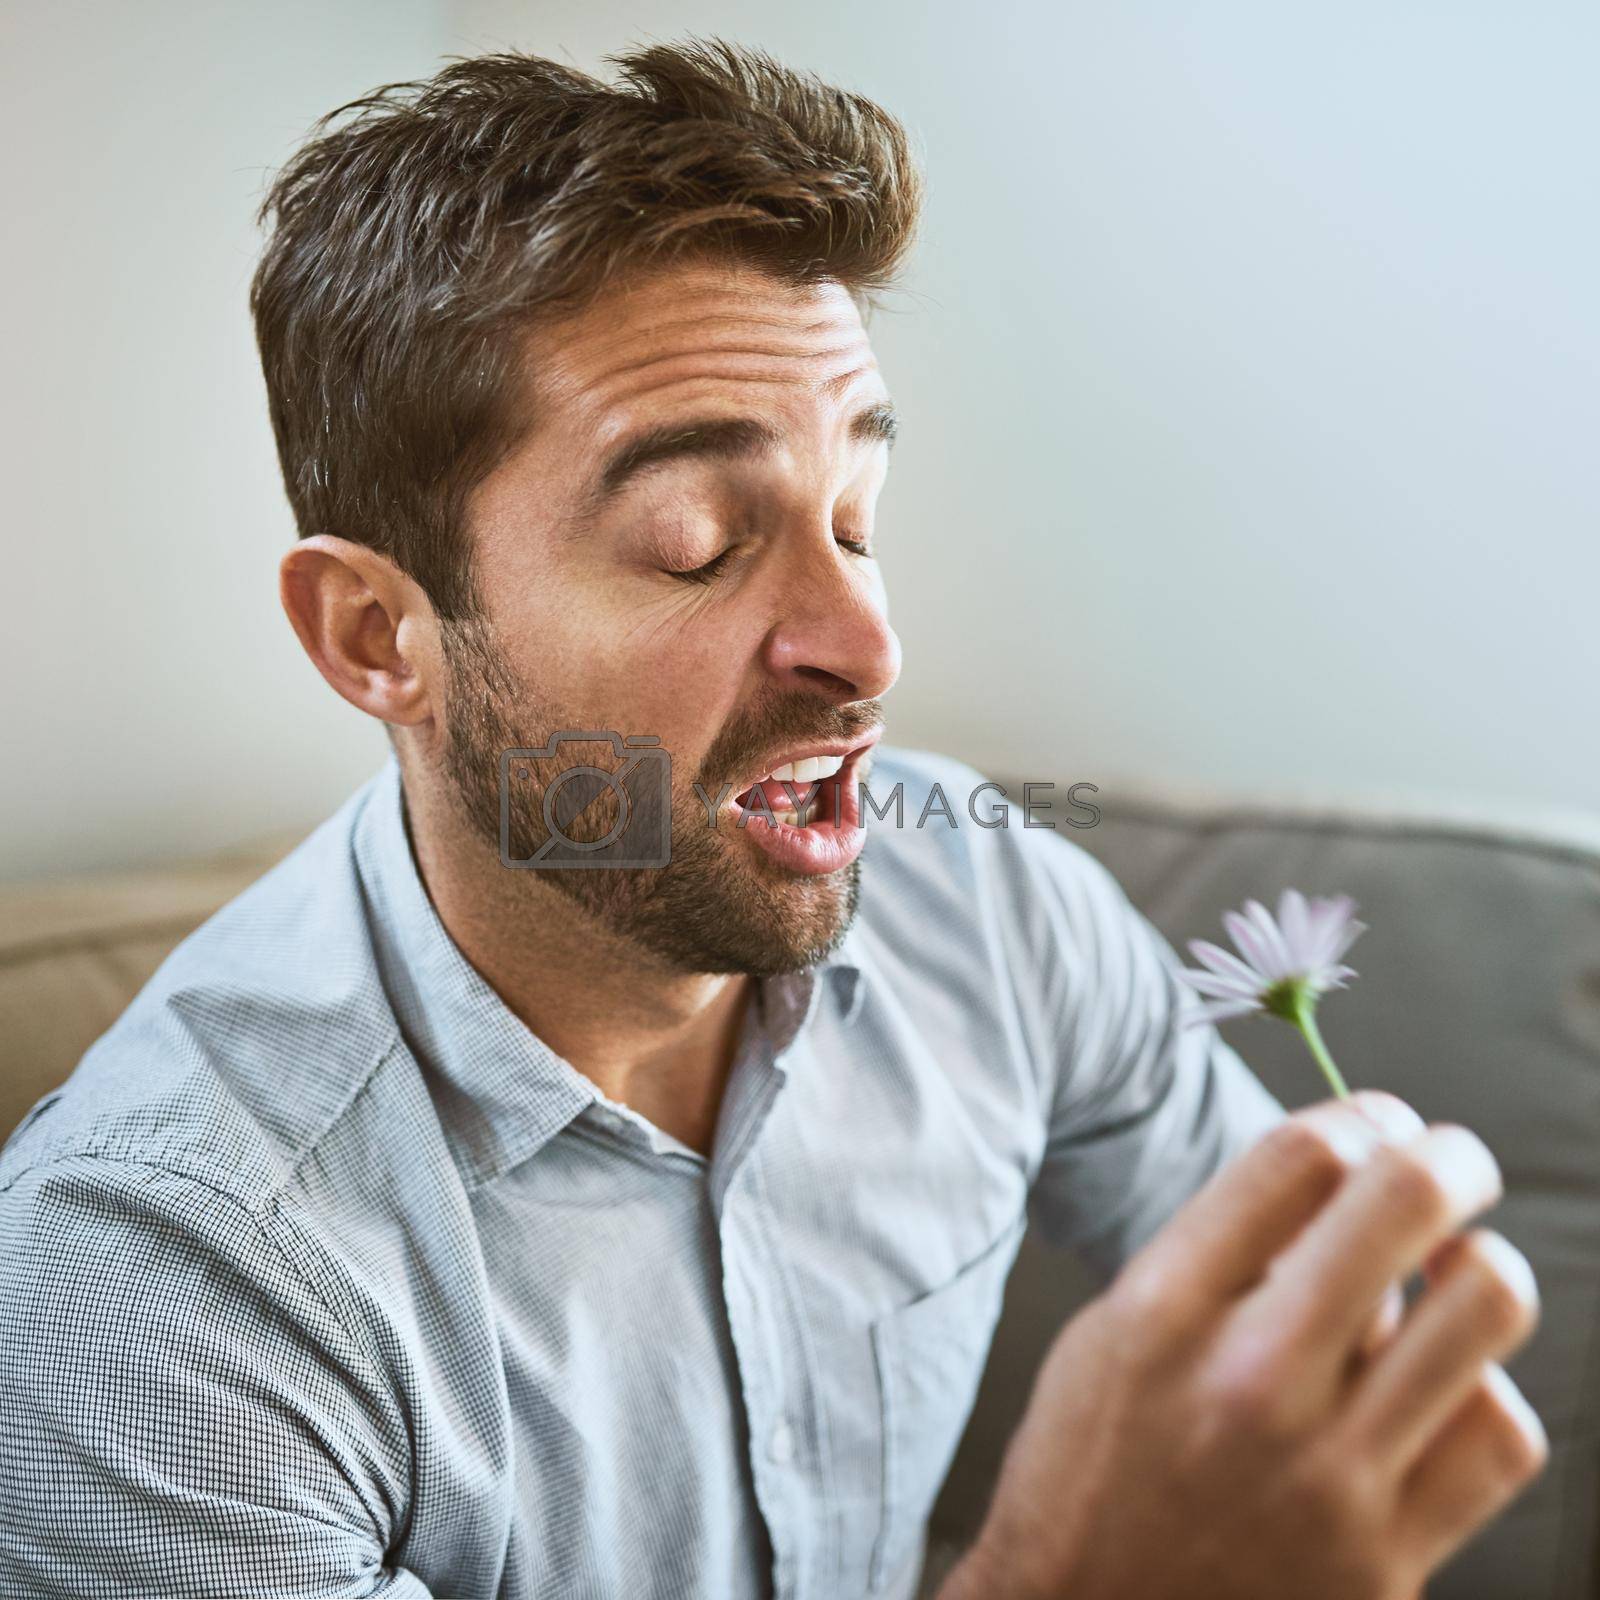 Royalty free image of Flowers make me sneeze. a carefree young man about to sneeze while holding a flower in his hands and seated on a couch at home. by YuriArcurs